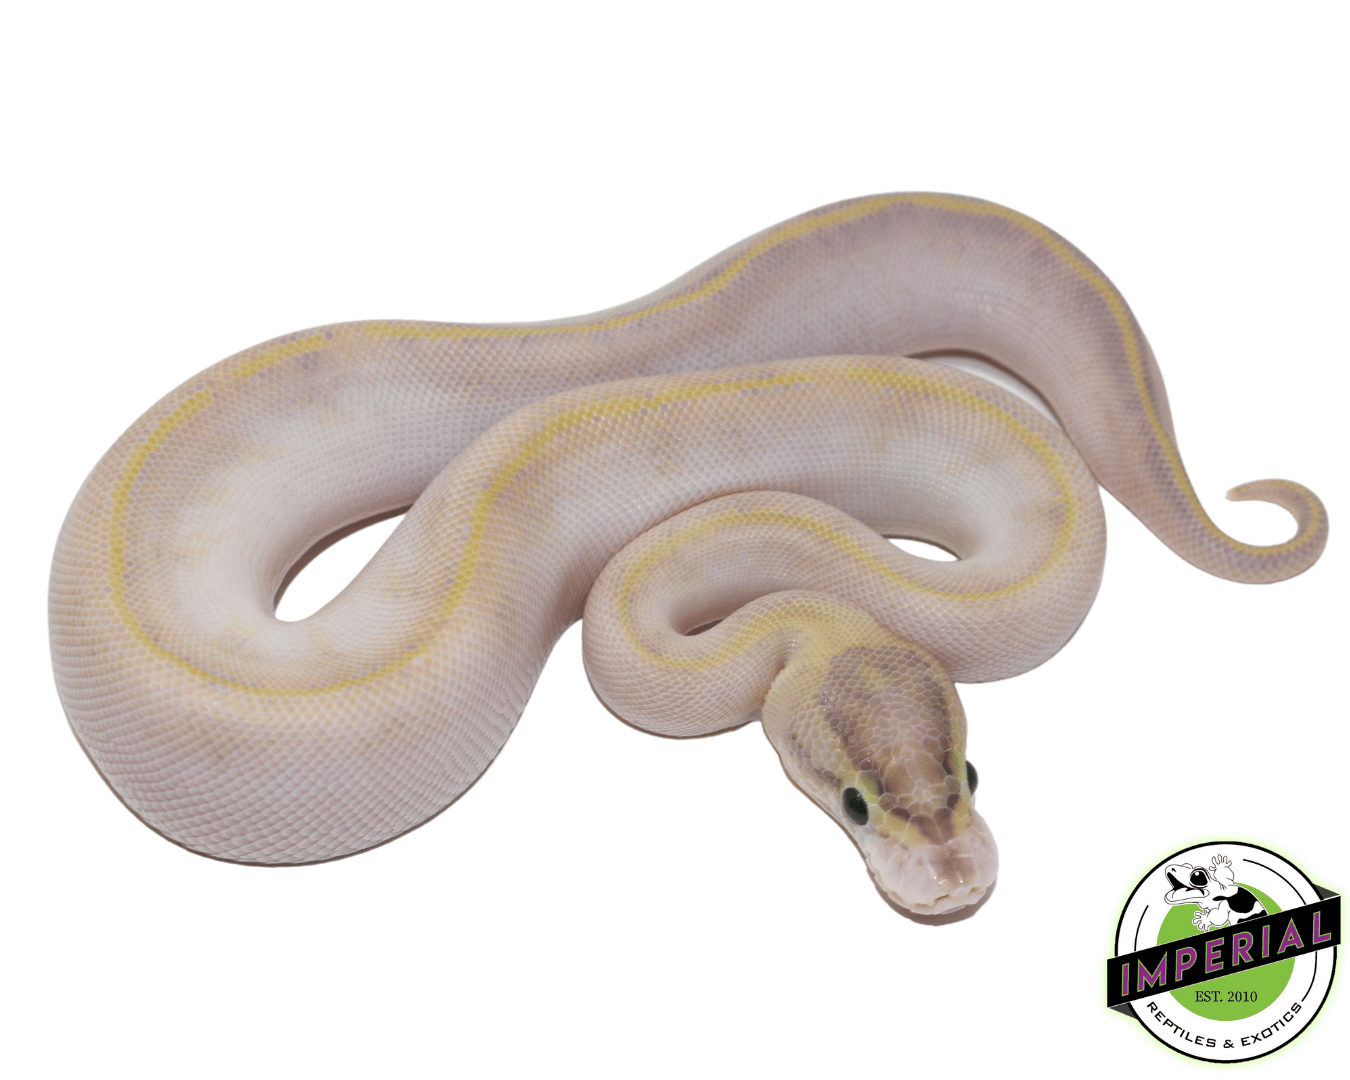 ivory ball python for sale, buy reptiles online